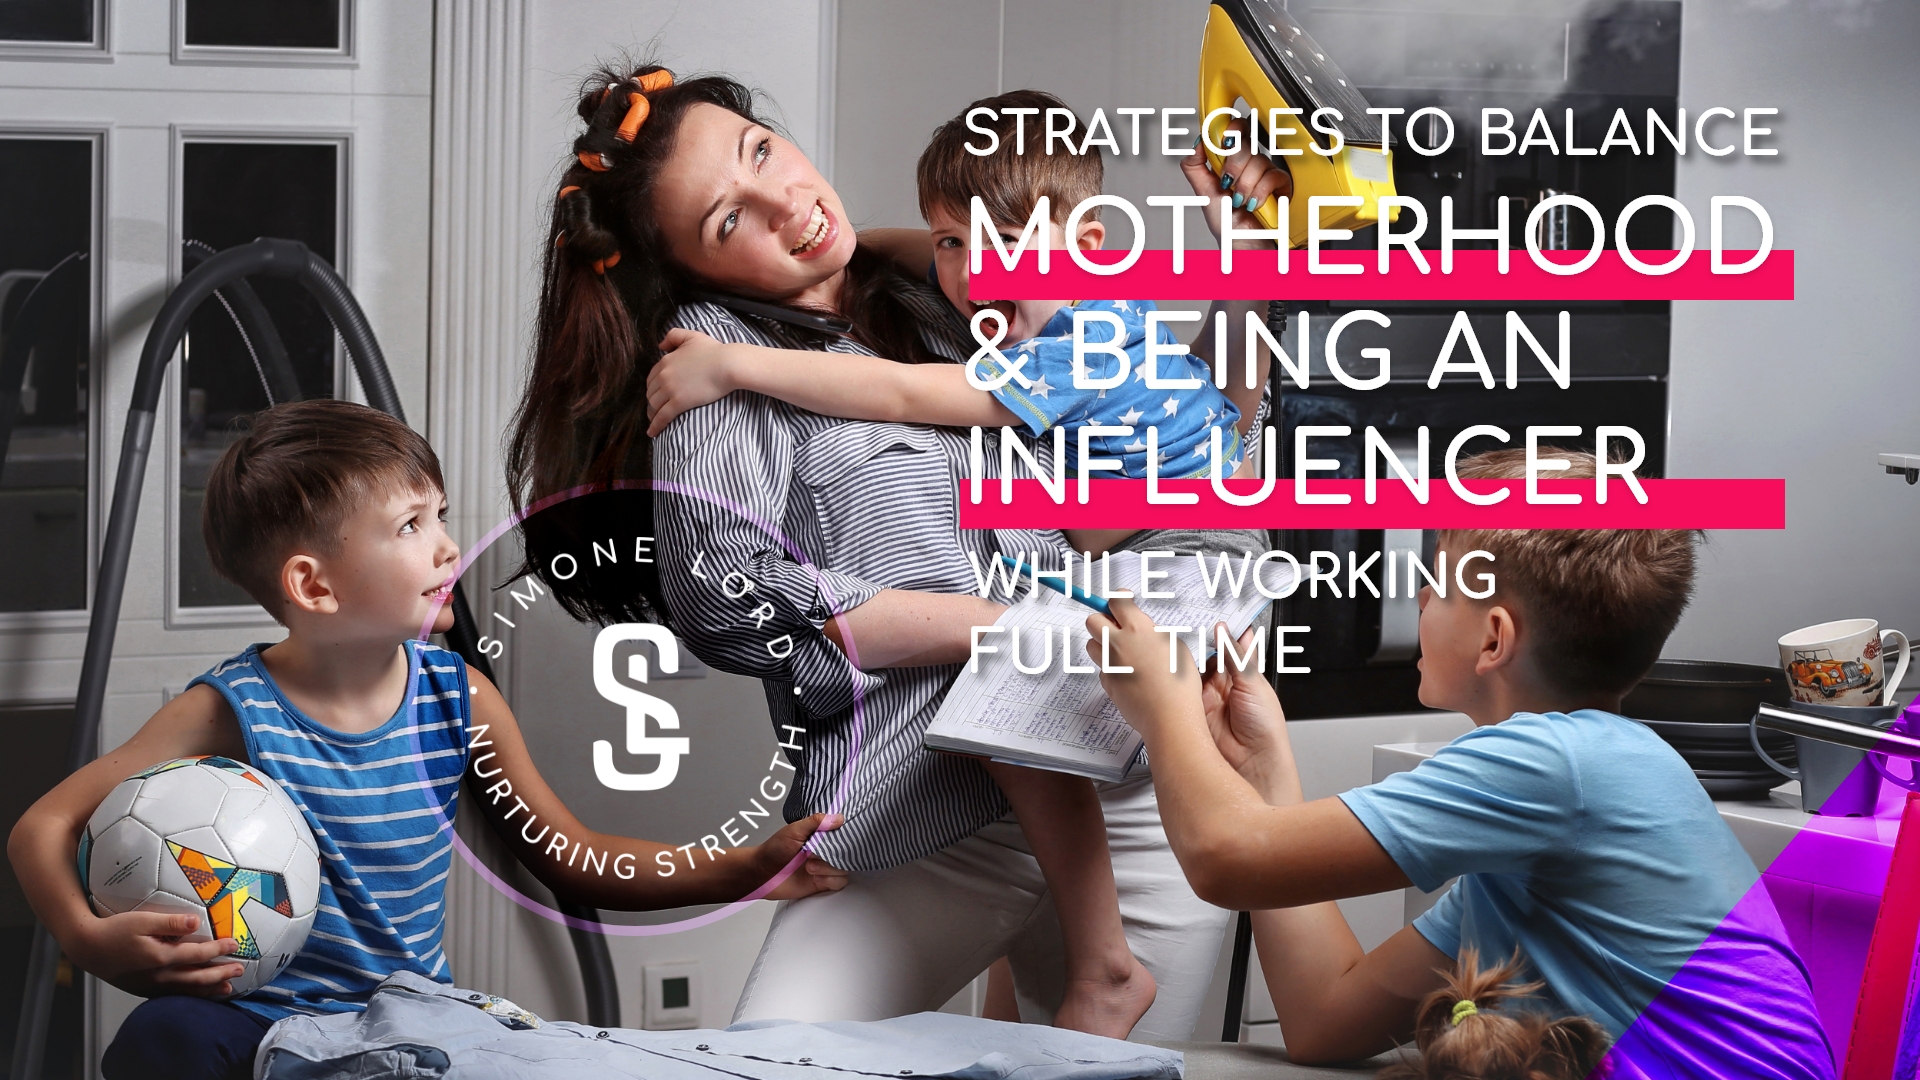 Strategies to Balance Motherhood and Being an Influencer While Working Full Time